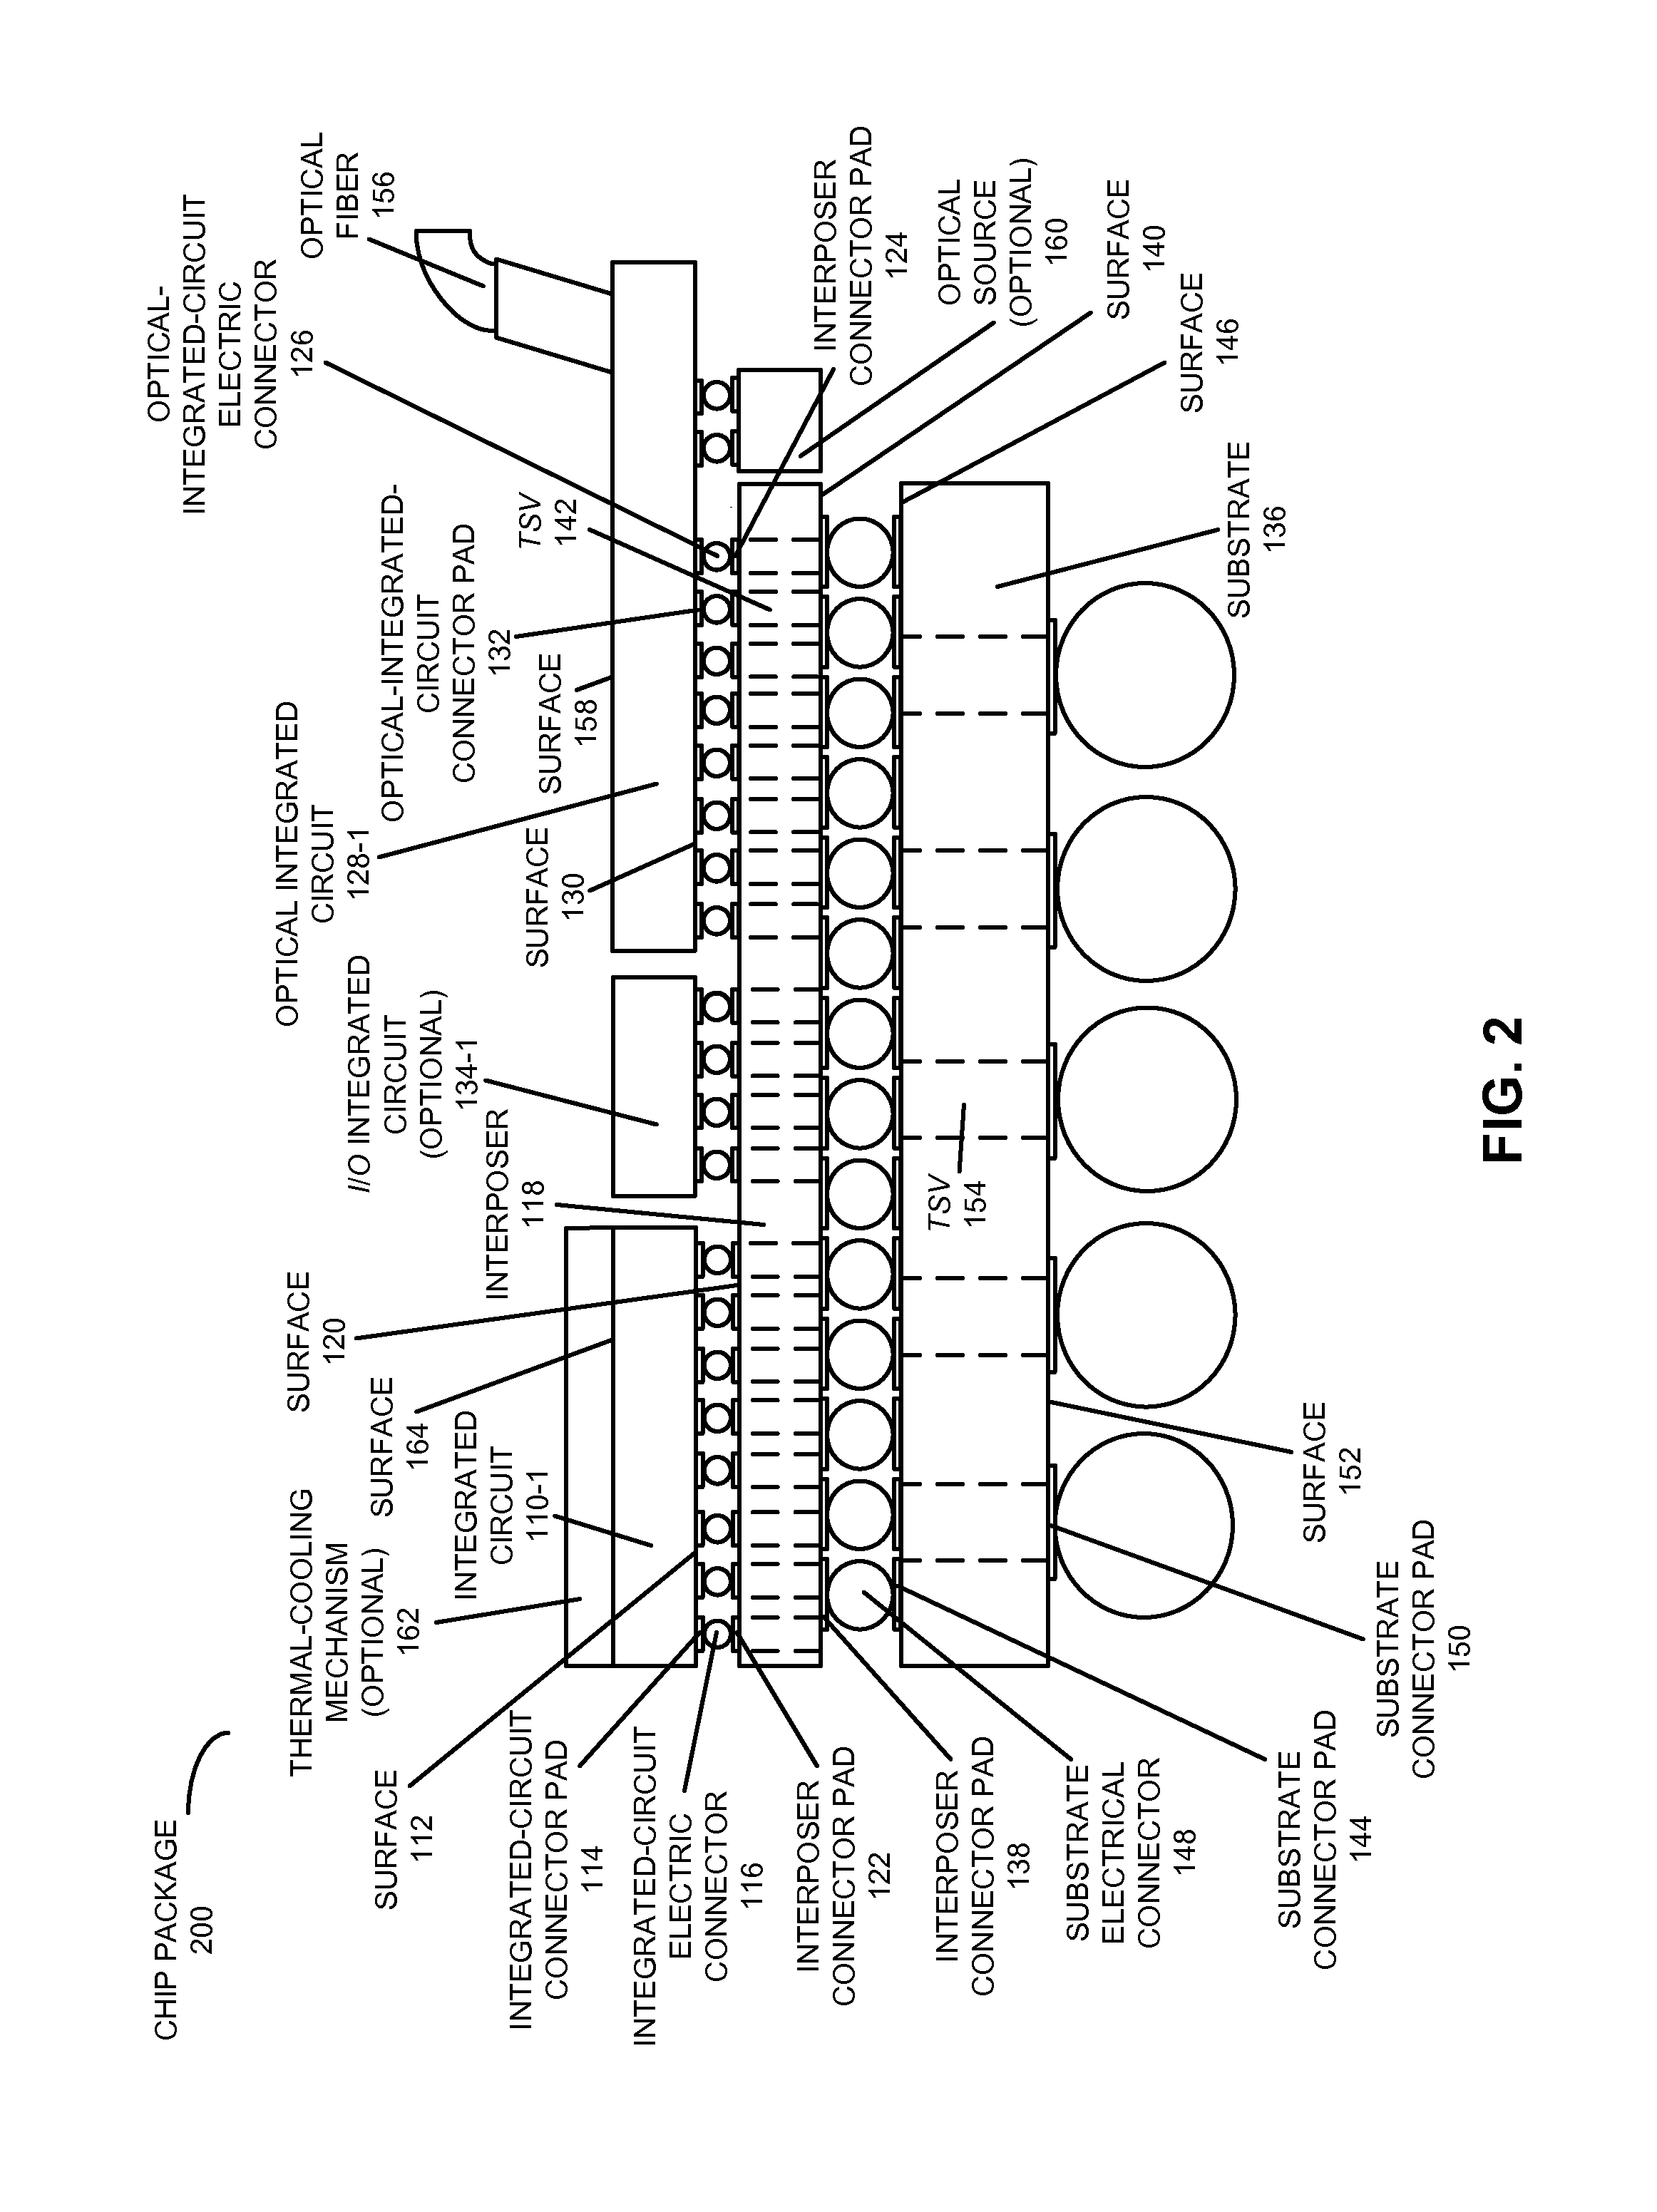 Hybrid-integrated photonic chip package with an interposer